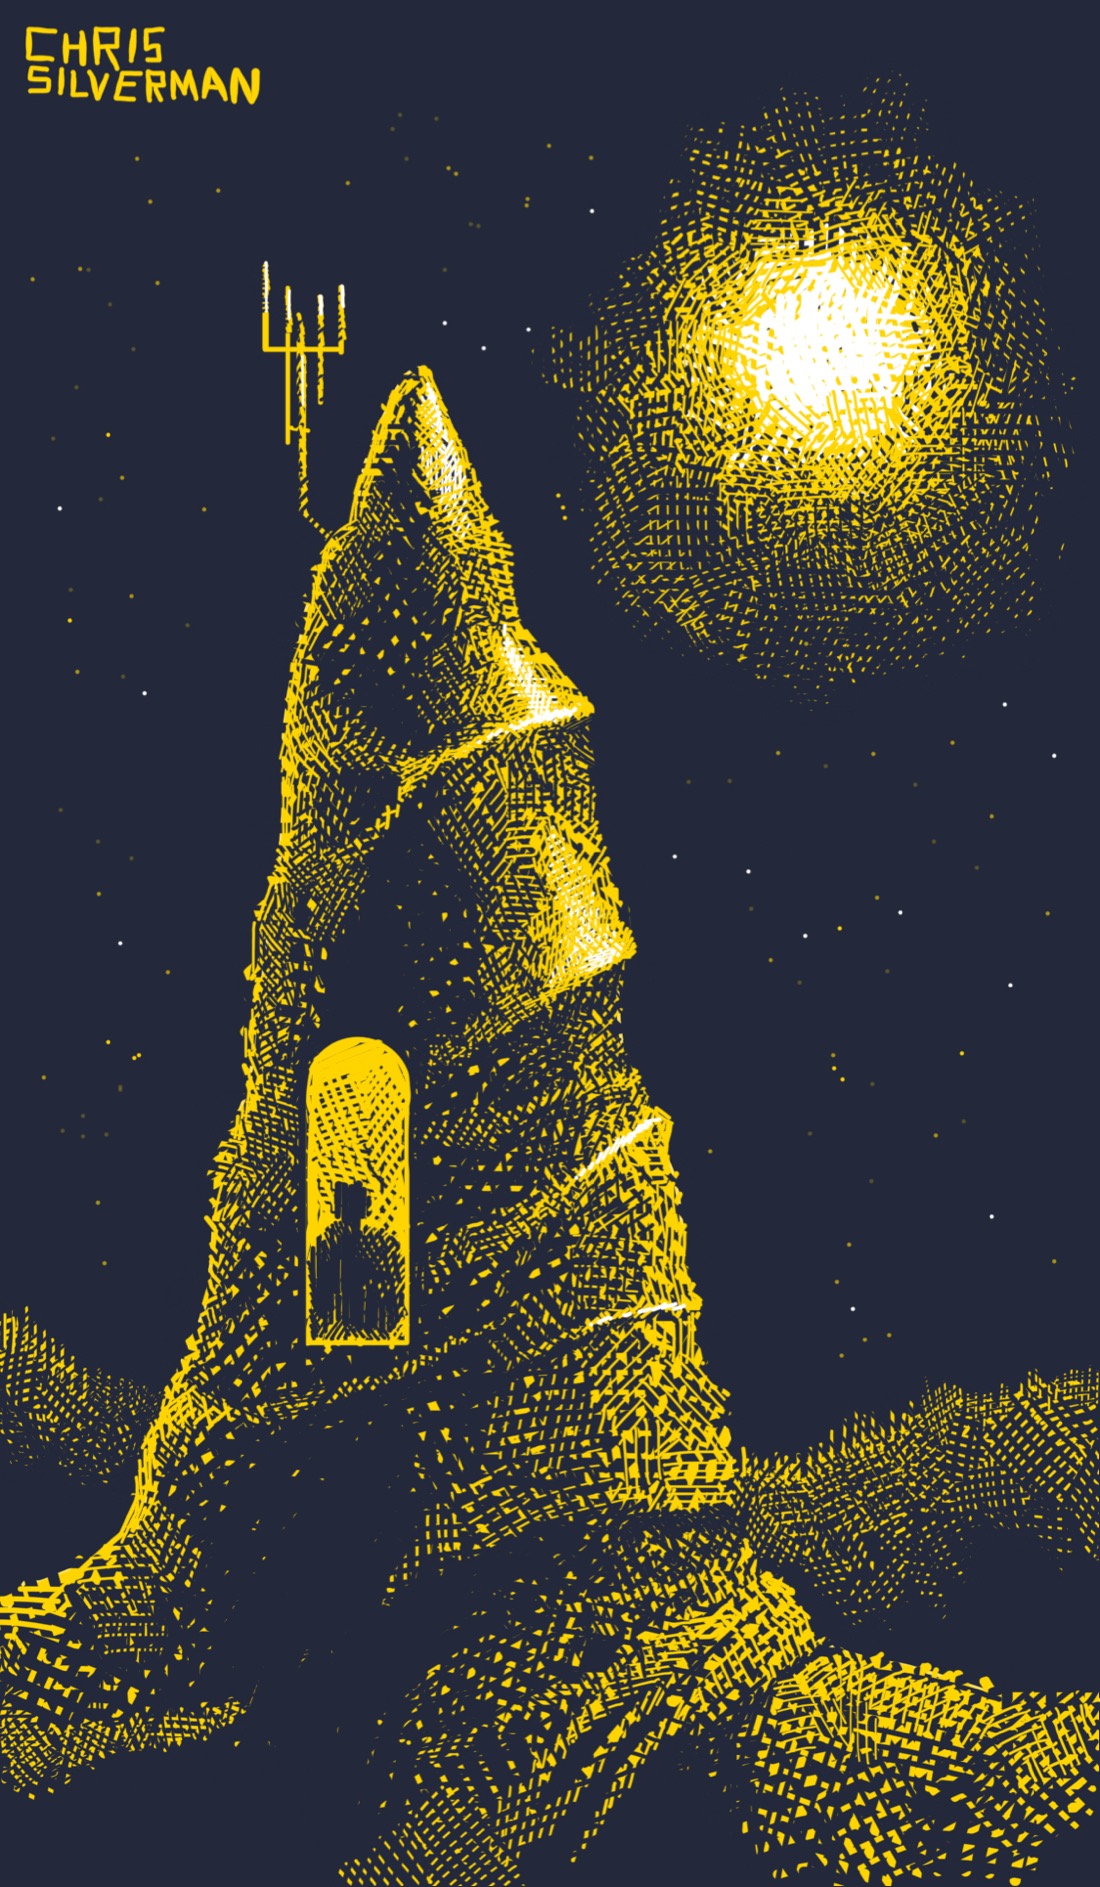 A barren landscape at night; a clear sky filled with stars. A weird, conical structure protrudes up from the ground, sort of a cross between a drillbit and a wasp nest. Inset into the structure is a window—the silhouette of a person is visible. In the sky is a glowing celestial object. The drawing is yellow lines on a black background, with white highlights.